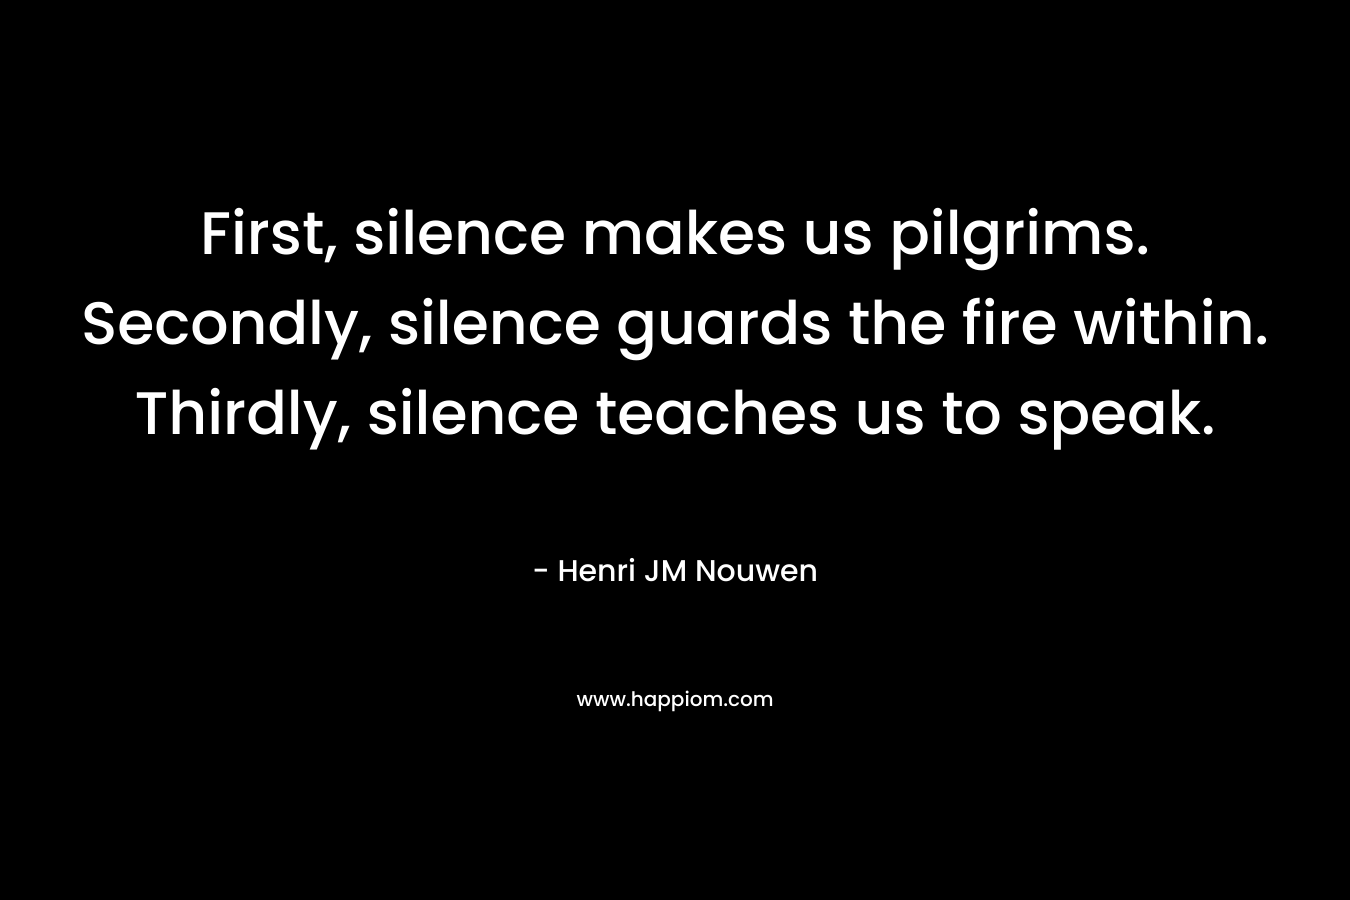 First, silence makes us pilgrims. Secondly, silence guards the fire within. Thirdly, silence teaches us to speak. – Henri JM Nouwen